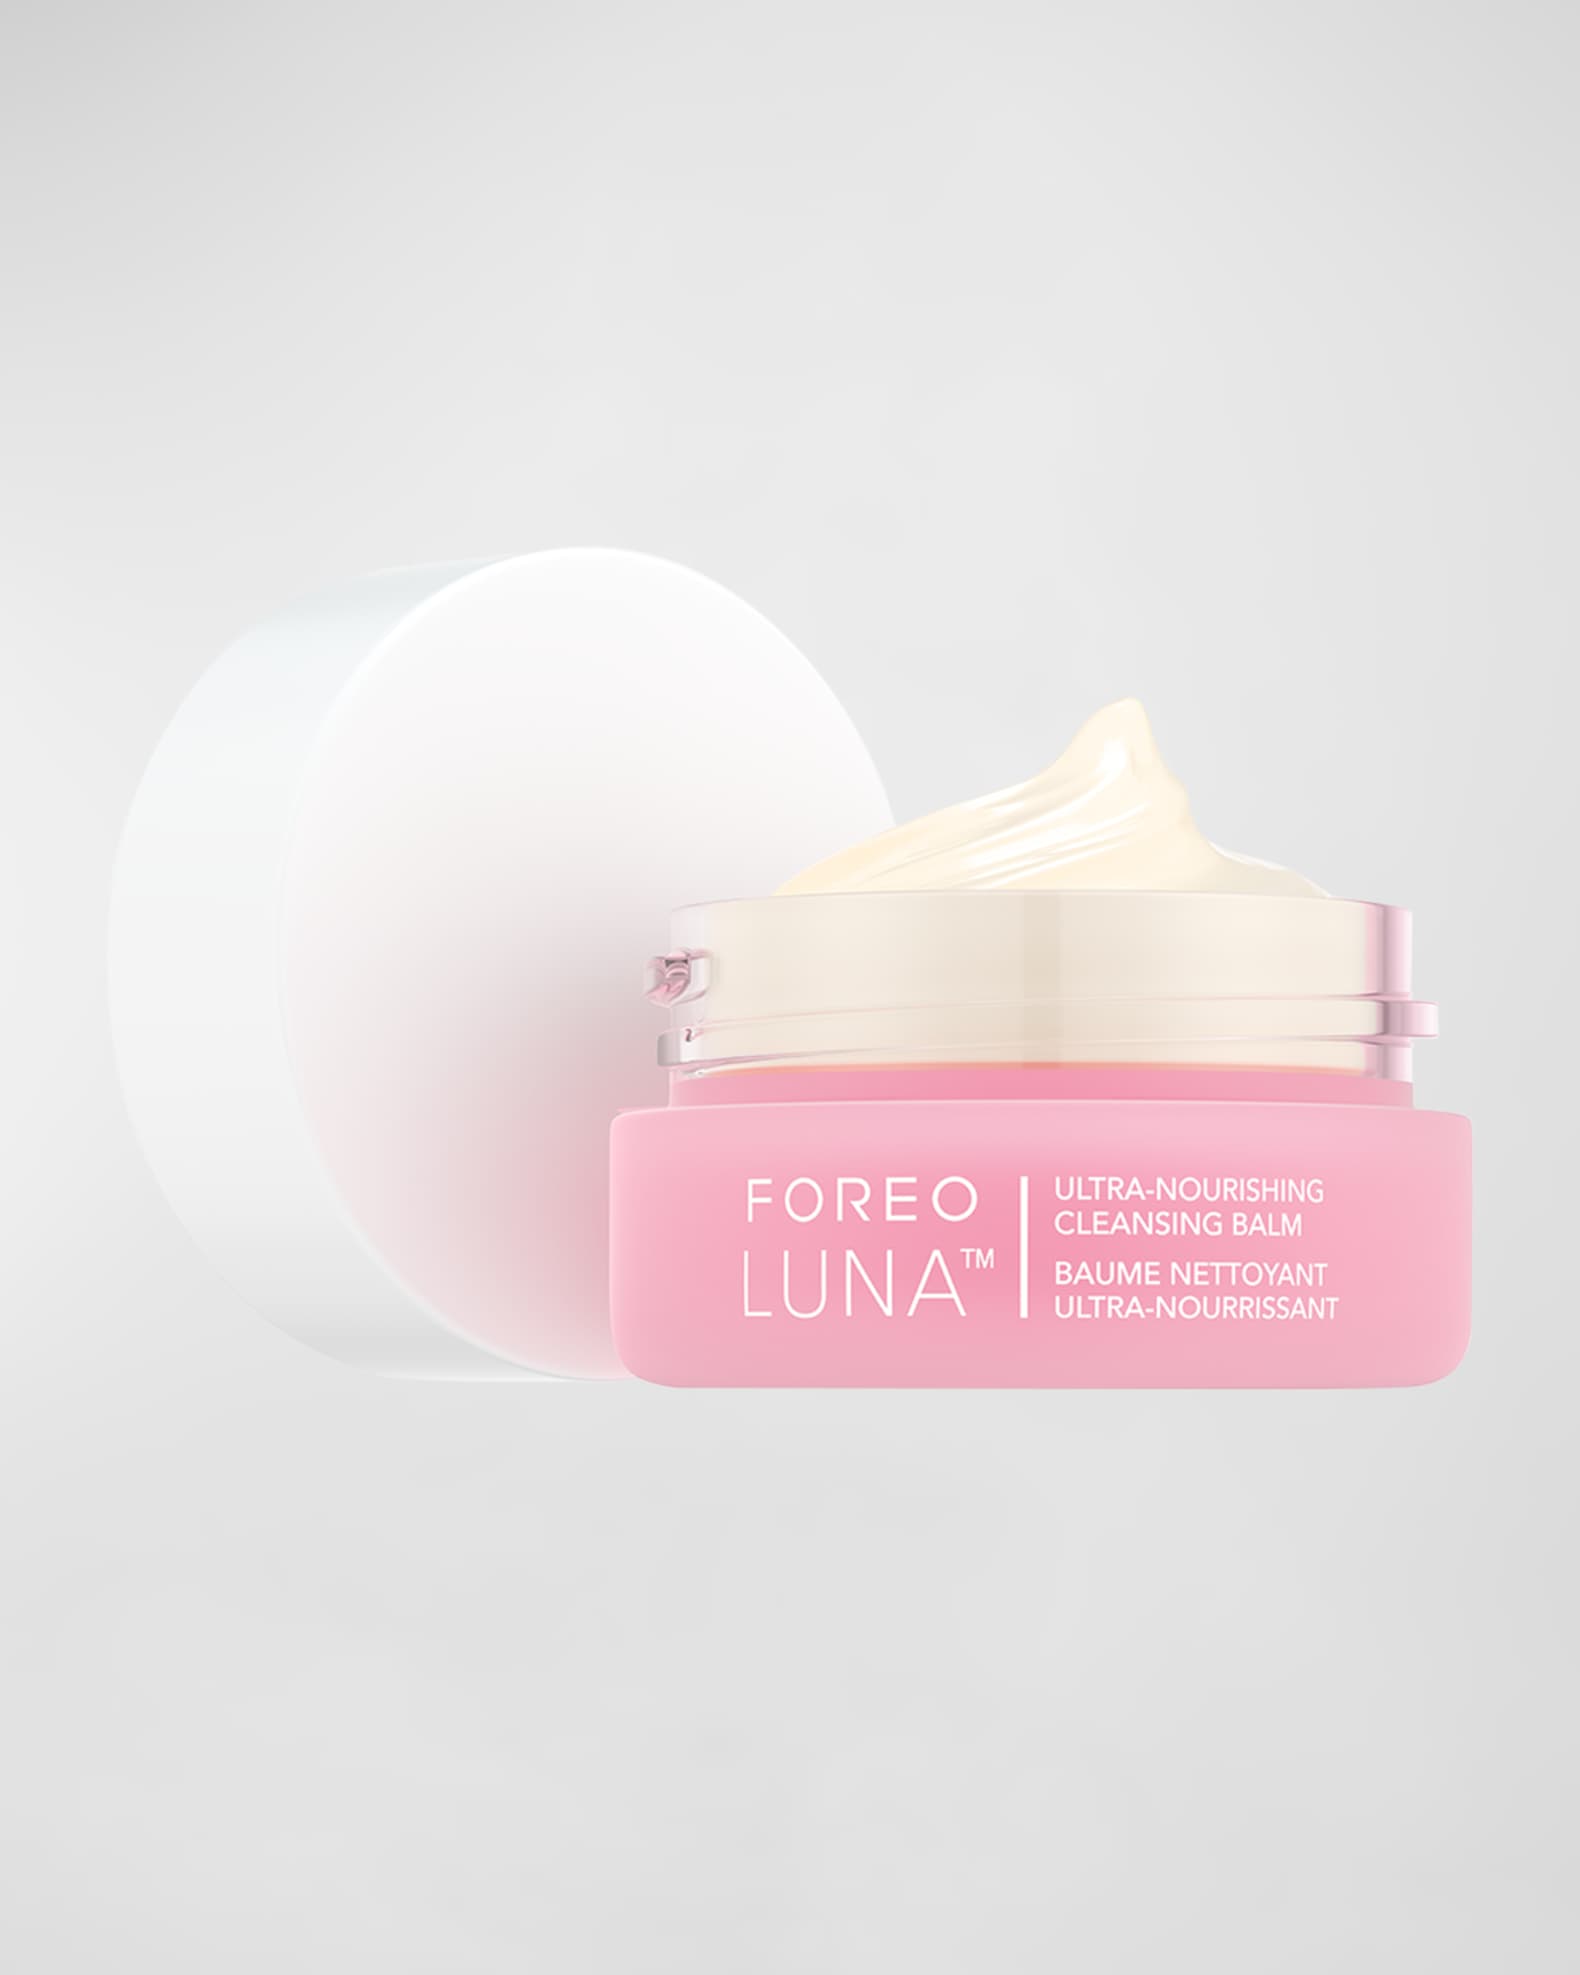 LUNA Neiman any Order Yours $250 Nourishing Cleansing with Ultra Foreo Marcus | Balm, Foreo